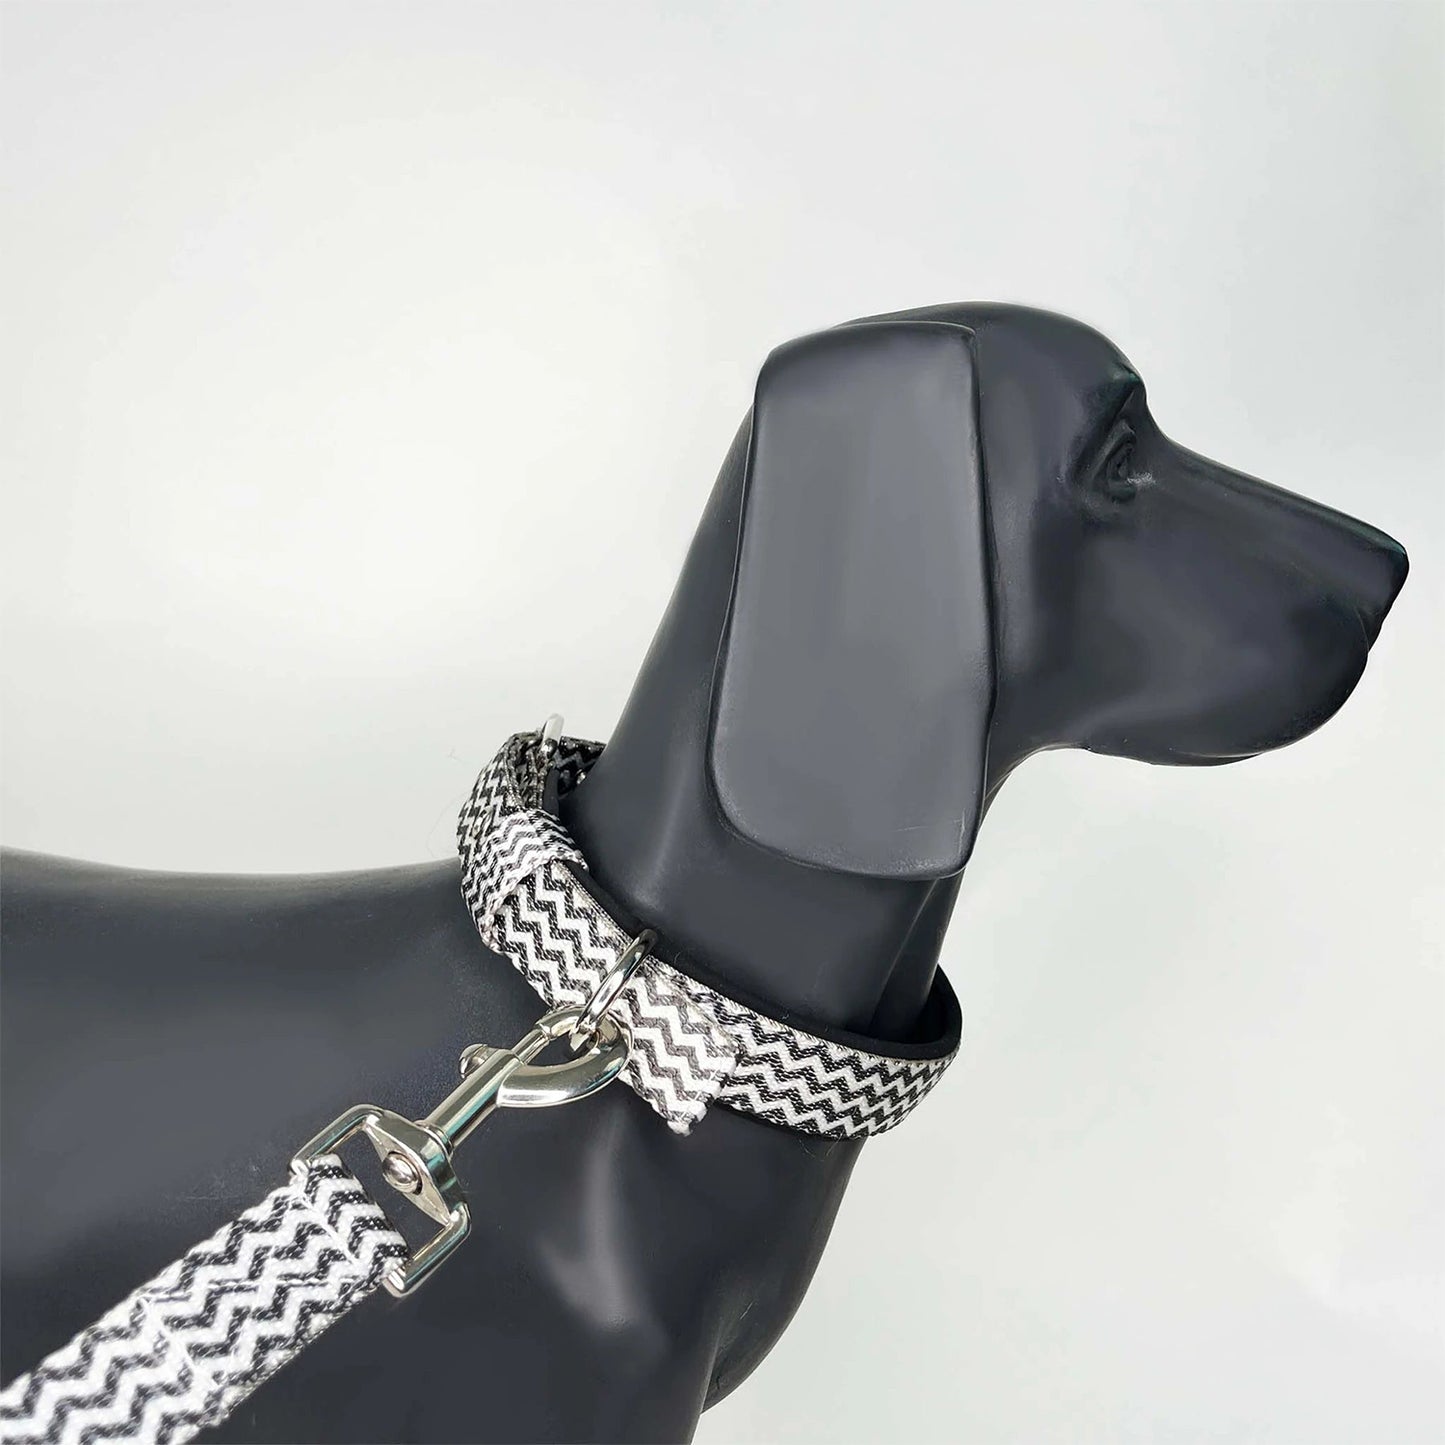 Forfurs - Tuxedog Pin Buckle Collar For Dogs & Cats